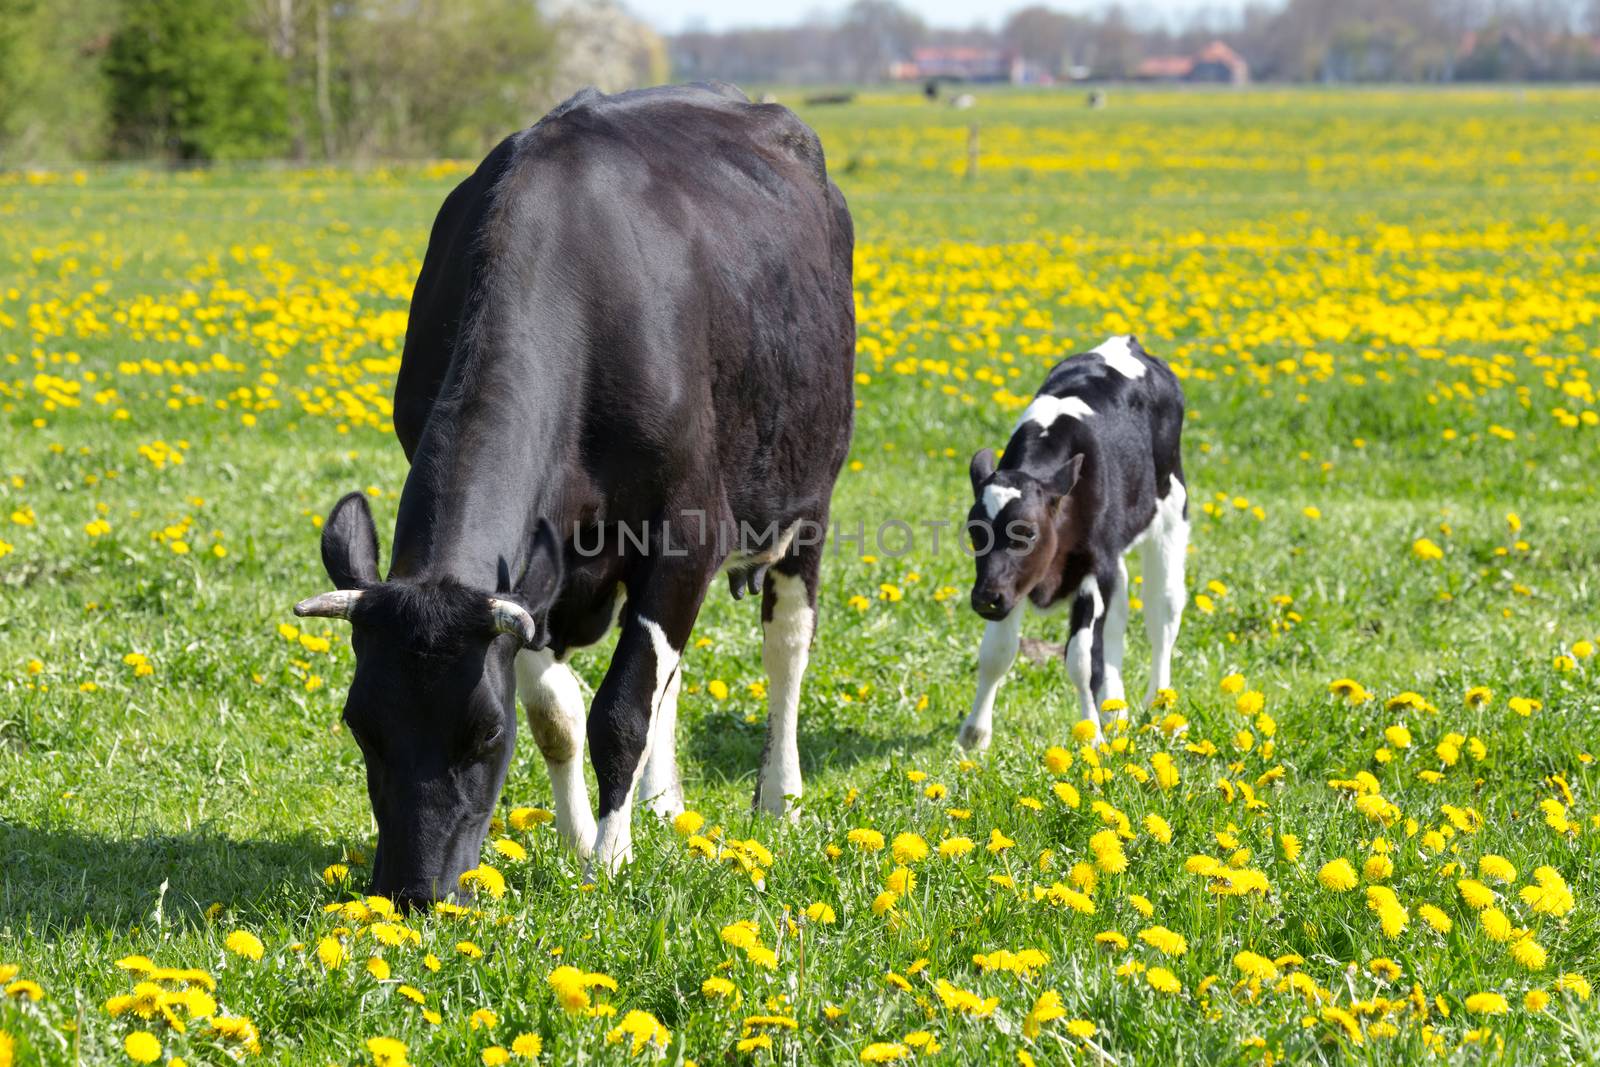 Spotted mother cow and calf in green meadow with yellow dandelions in spring